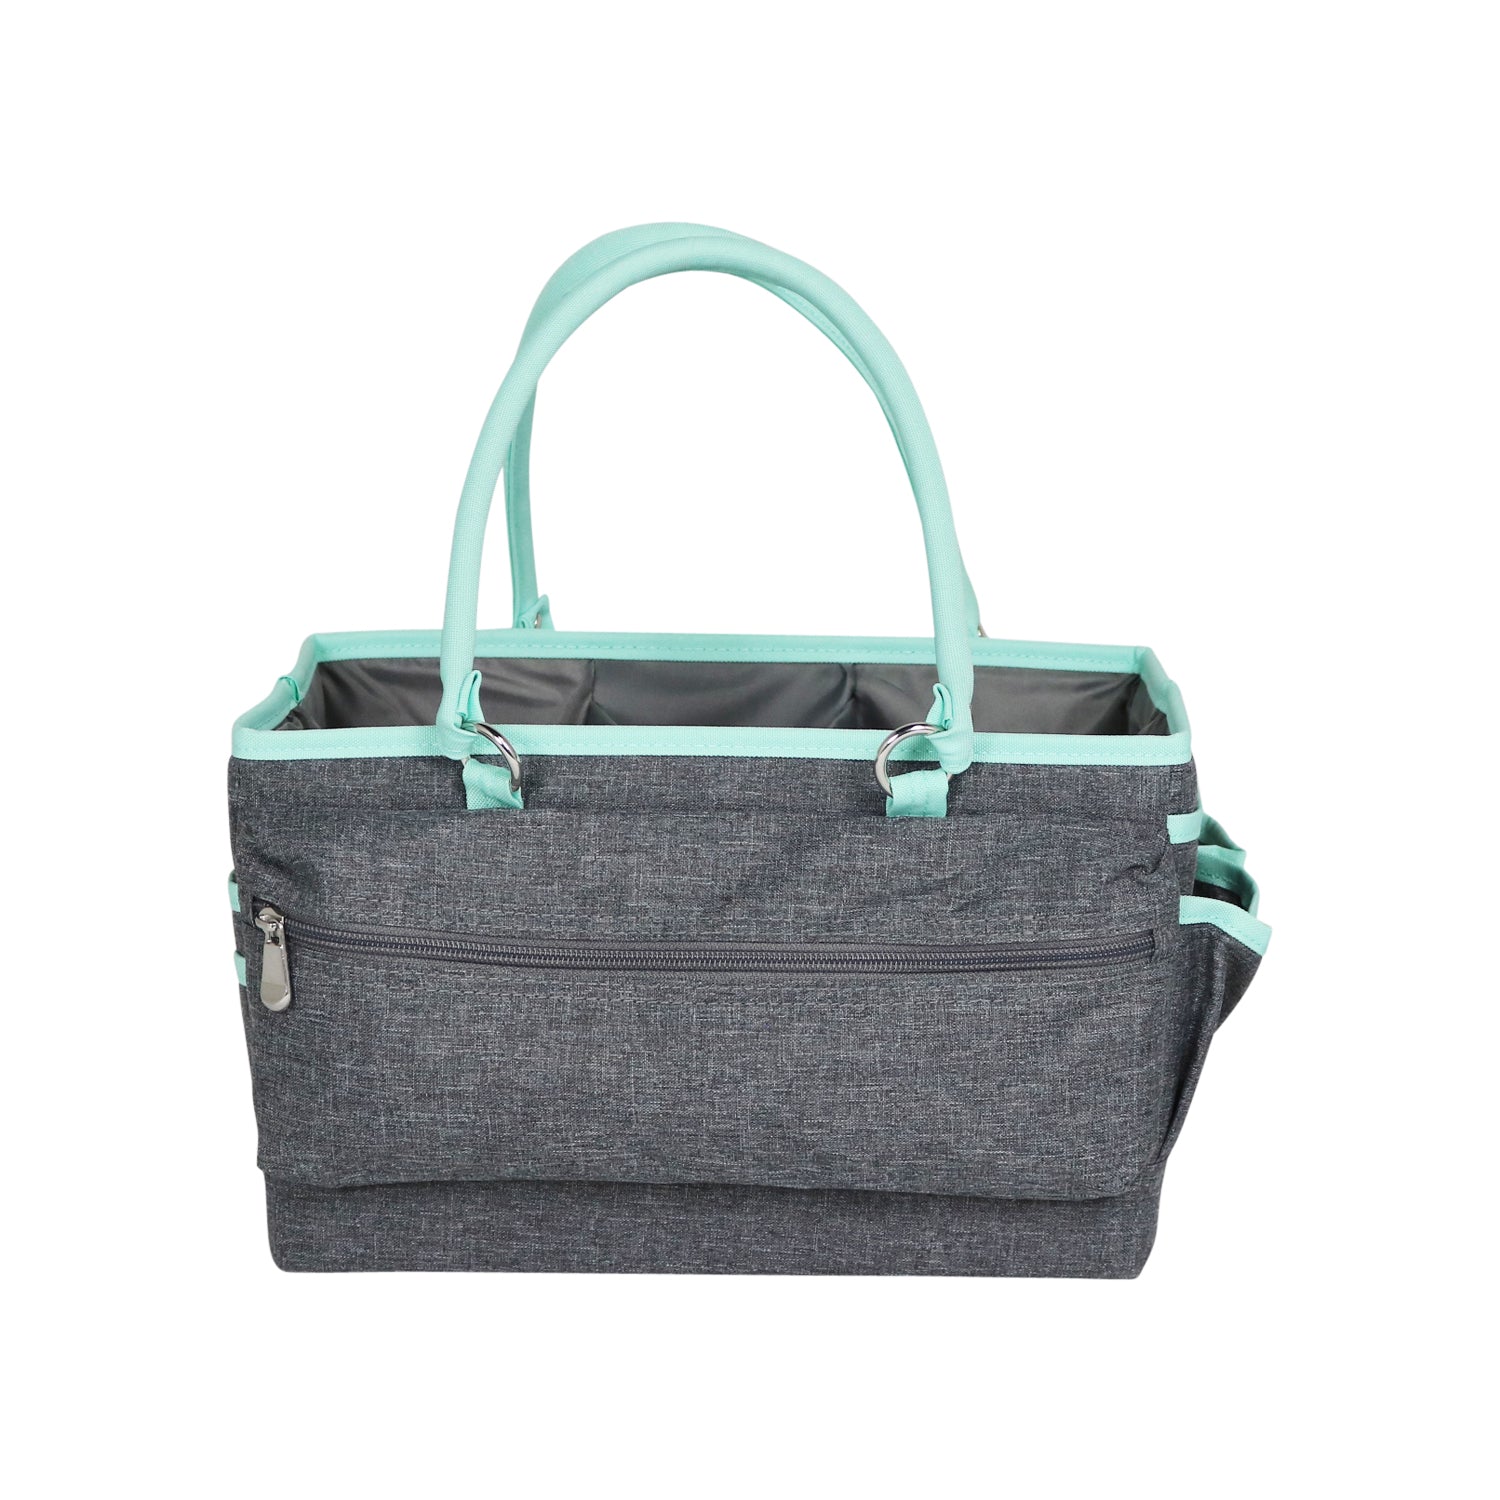 Vanilla and frost grey Strathberry midi tote bag - Collagerie